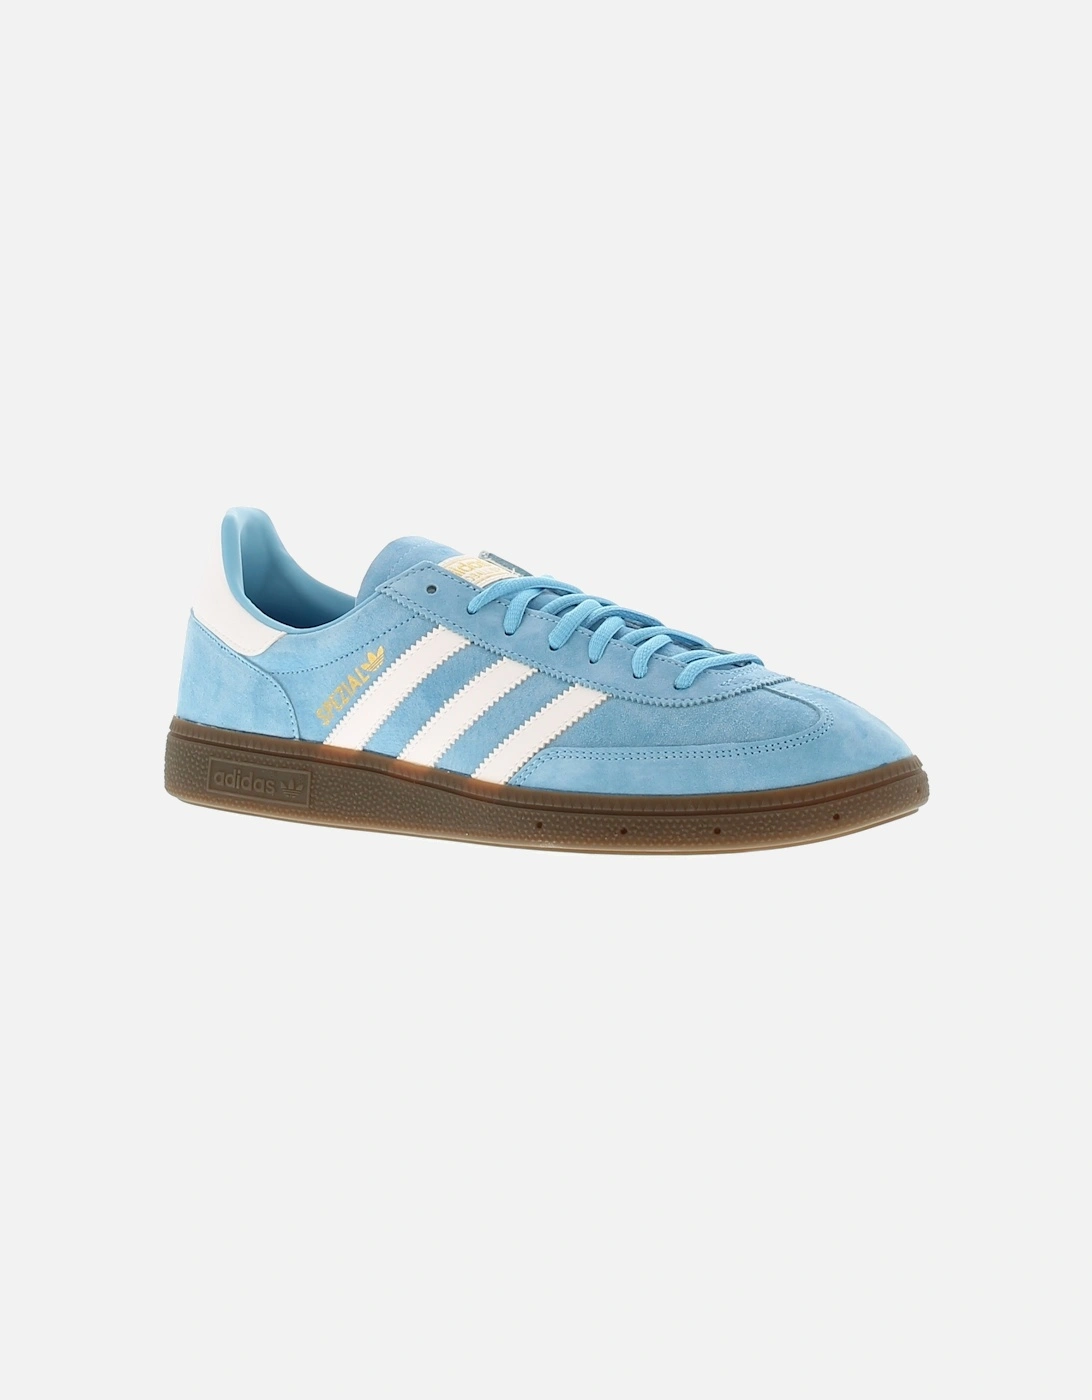 Mens Trainers Handball Spezial Leather Lace Up sky blue white U, 6 of 5